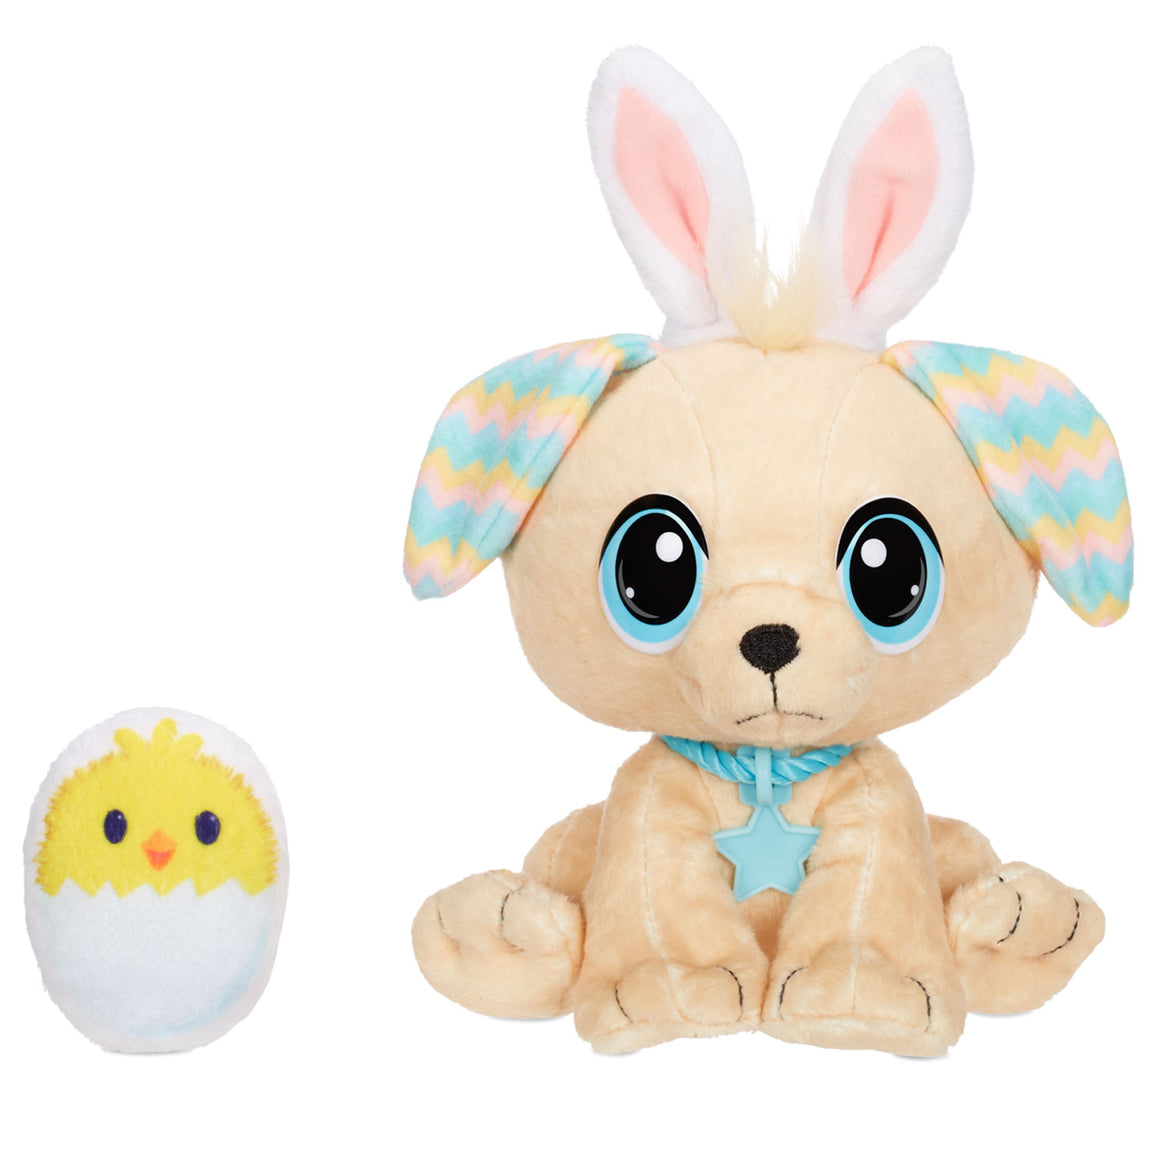 Rescue Tales Easter themed stuffed animal puppy